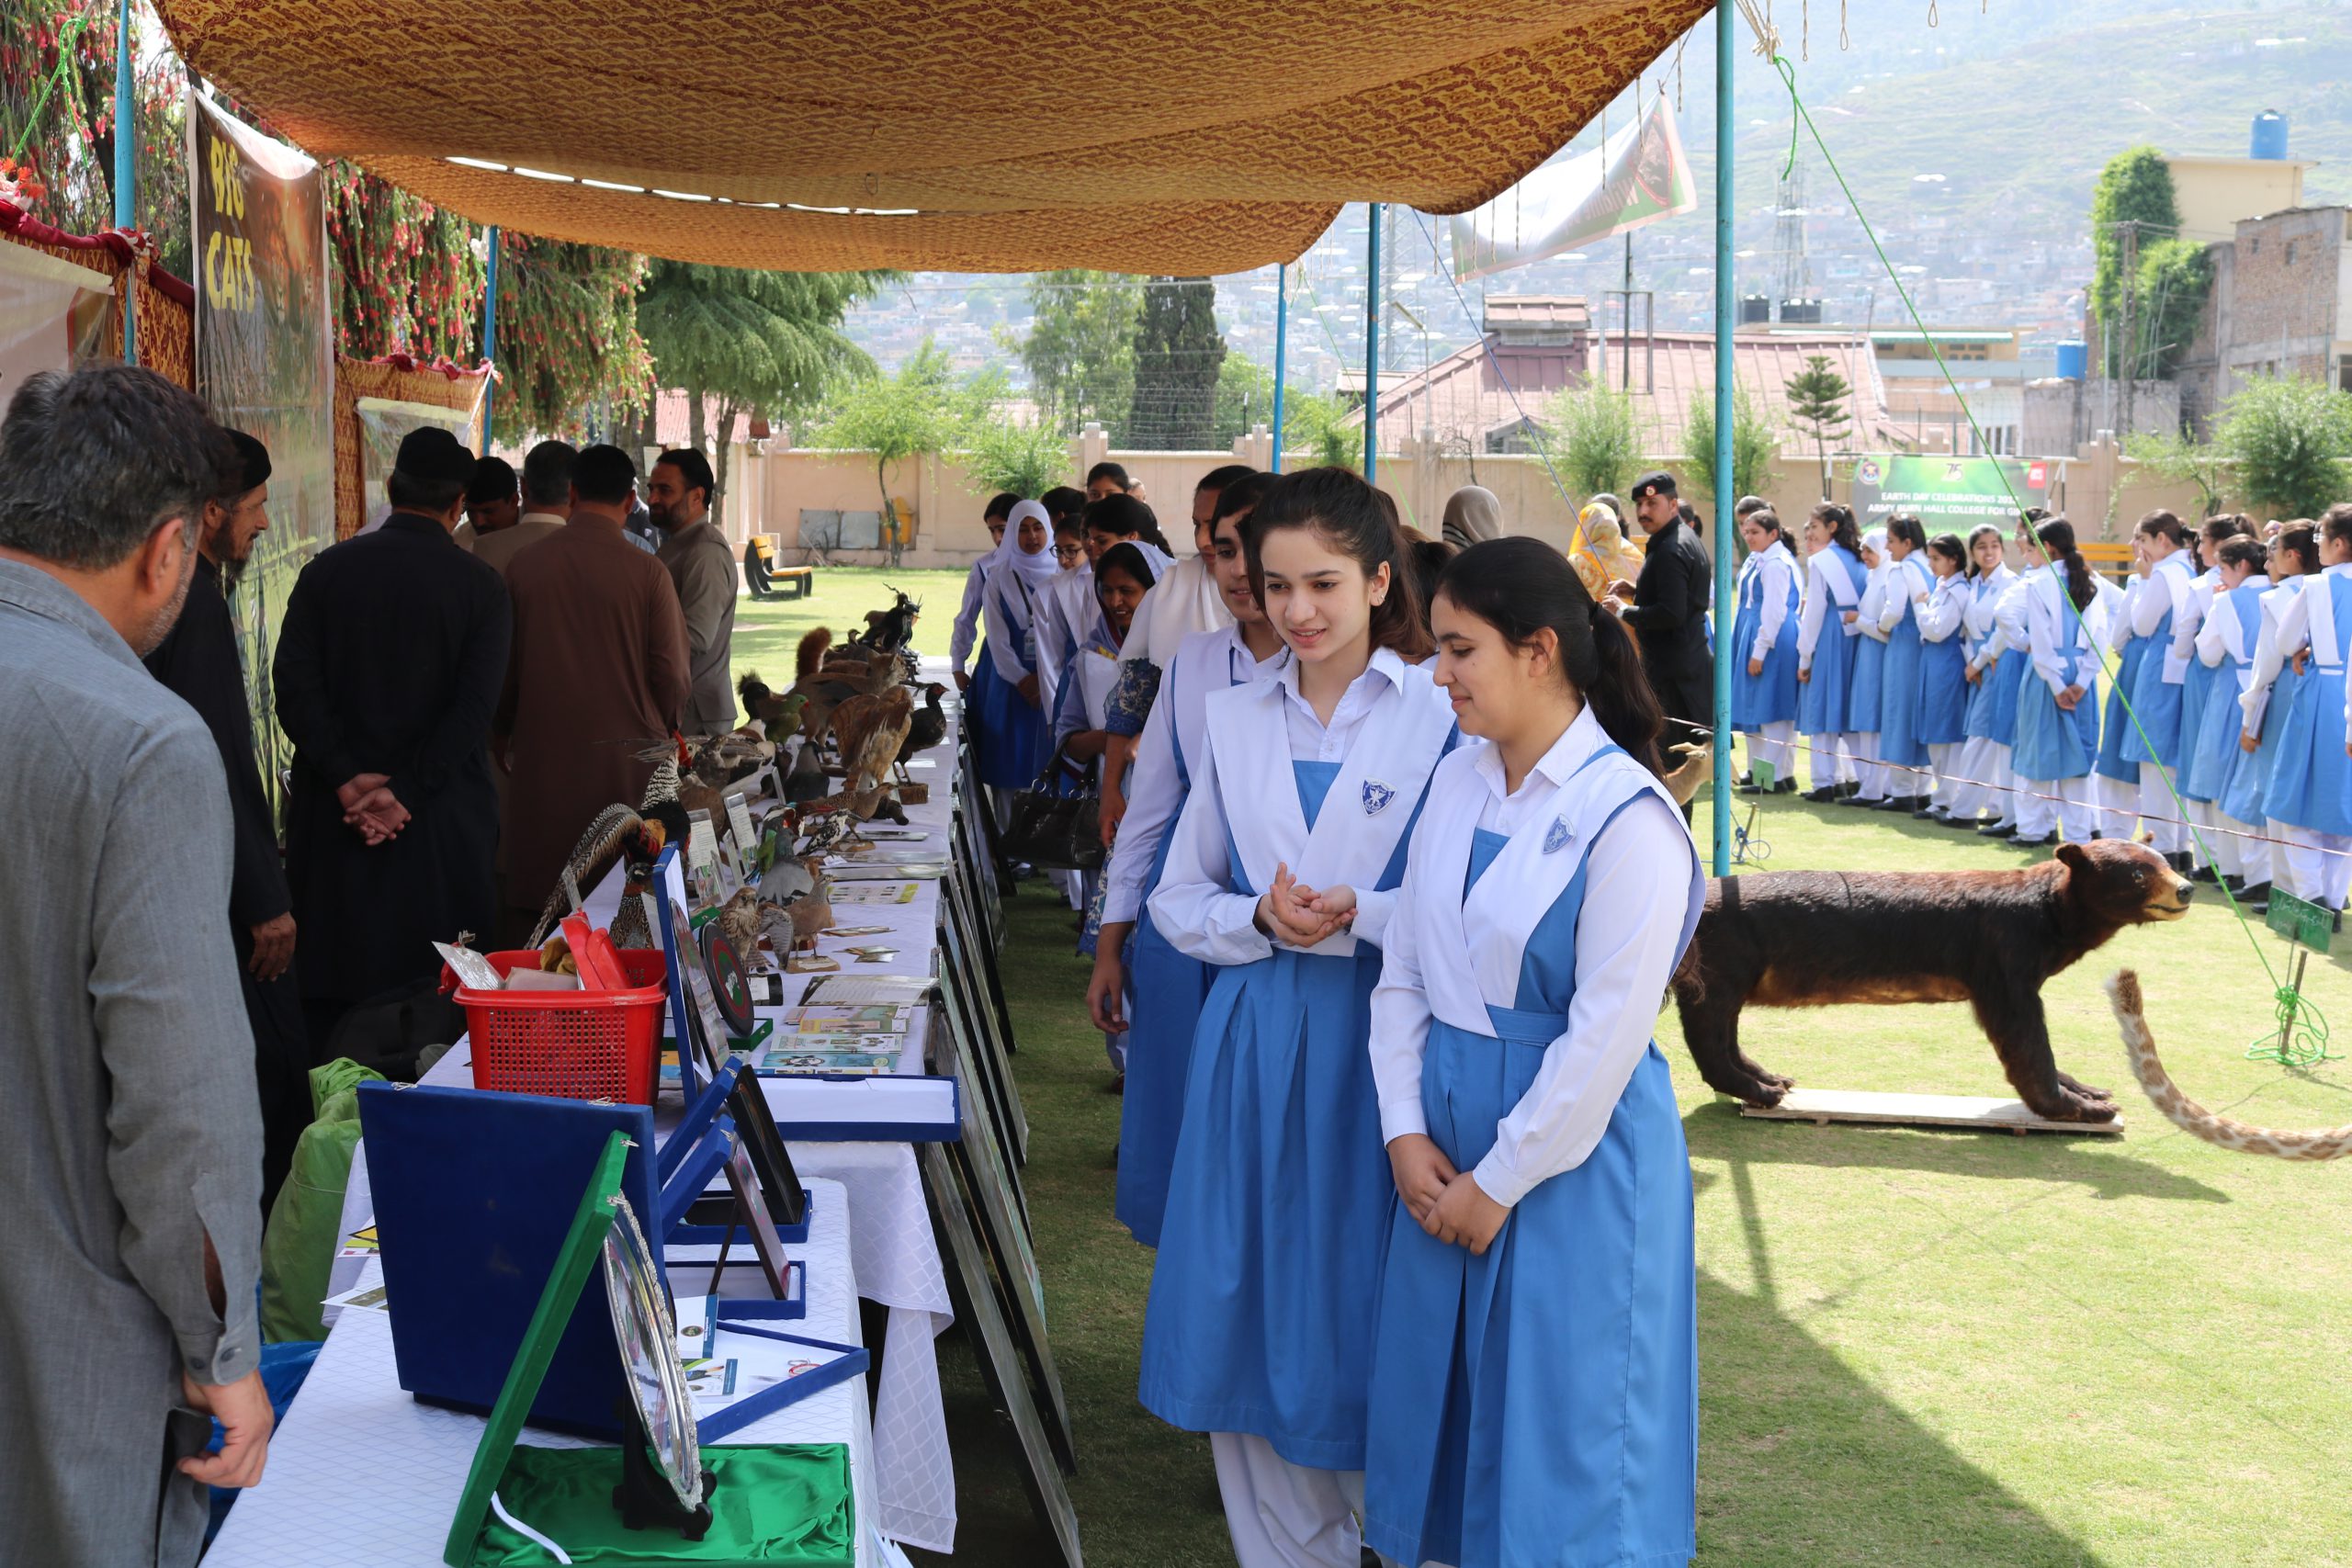 Students of Presentation Convent School Peshawar look at stuffed wild species displayed during their visit to the Wildlife Department of Khyber Pakhtukhwa as part of awareness raising field tour [image by: Adeel Saeed]